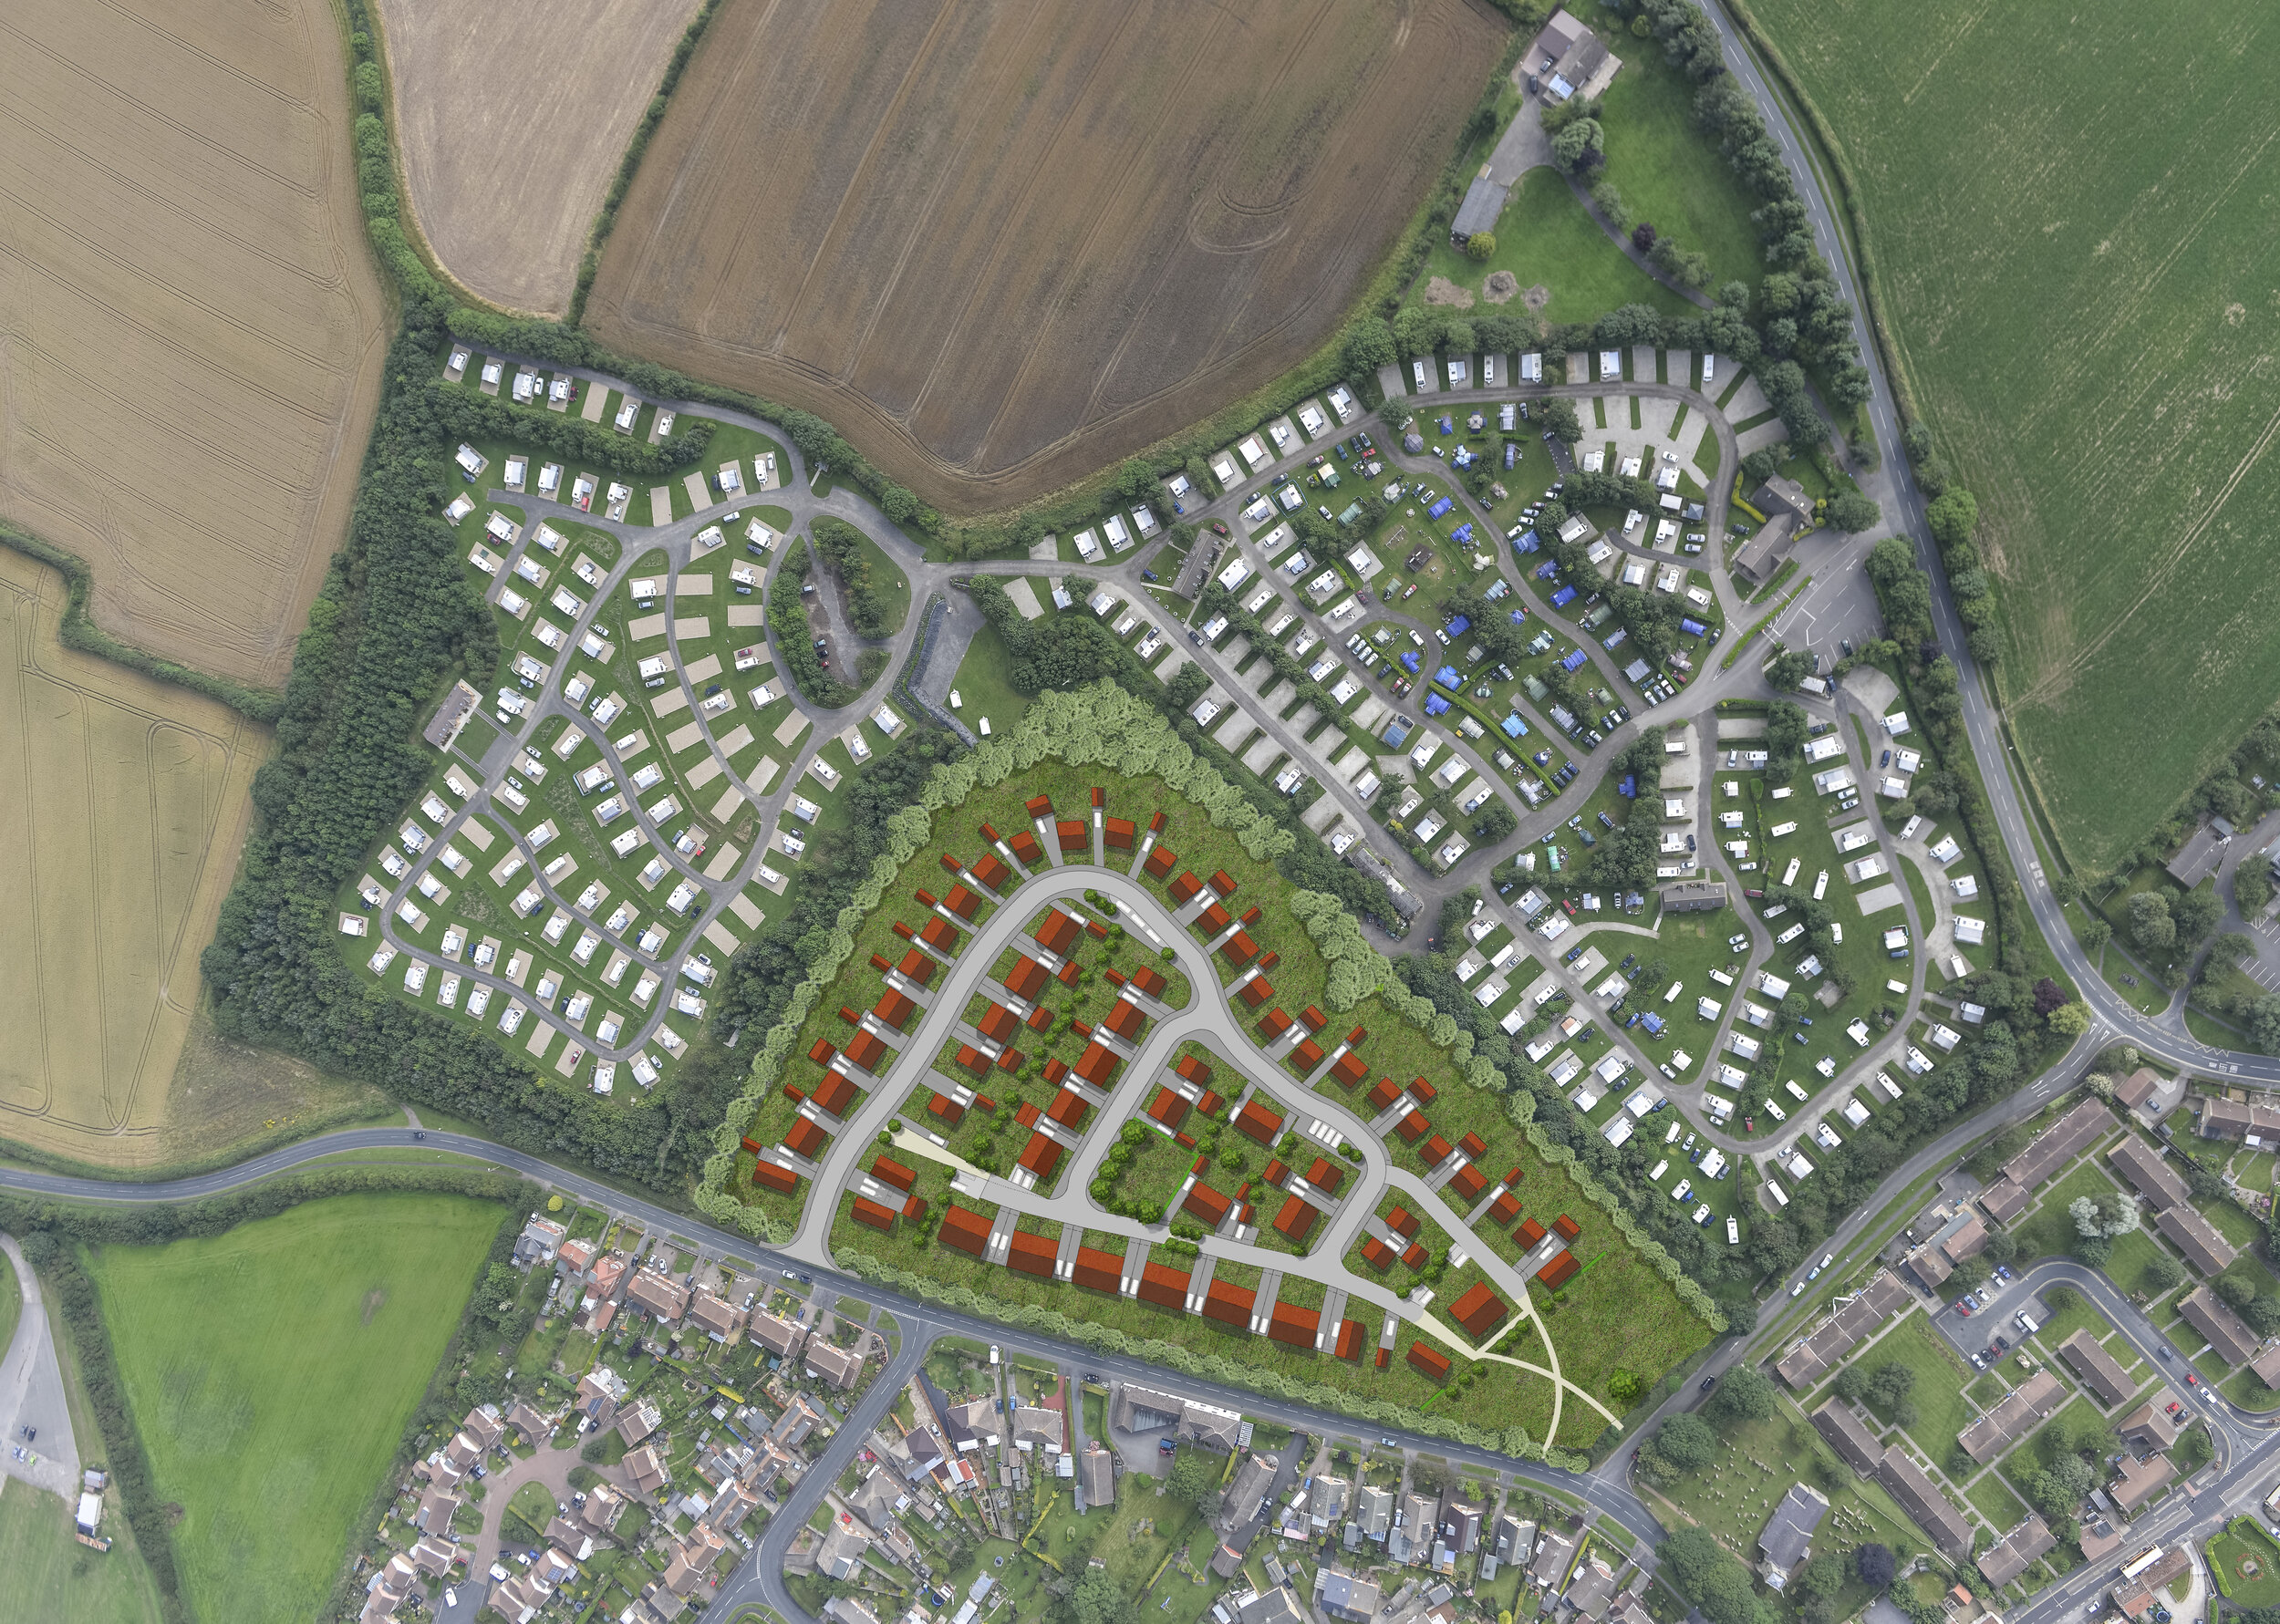 Outline Permission for 80 Dwellings